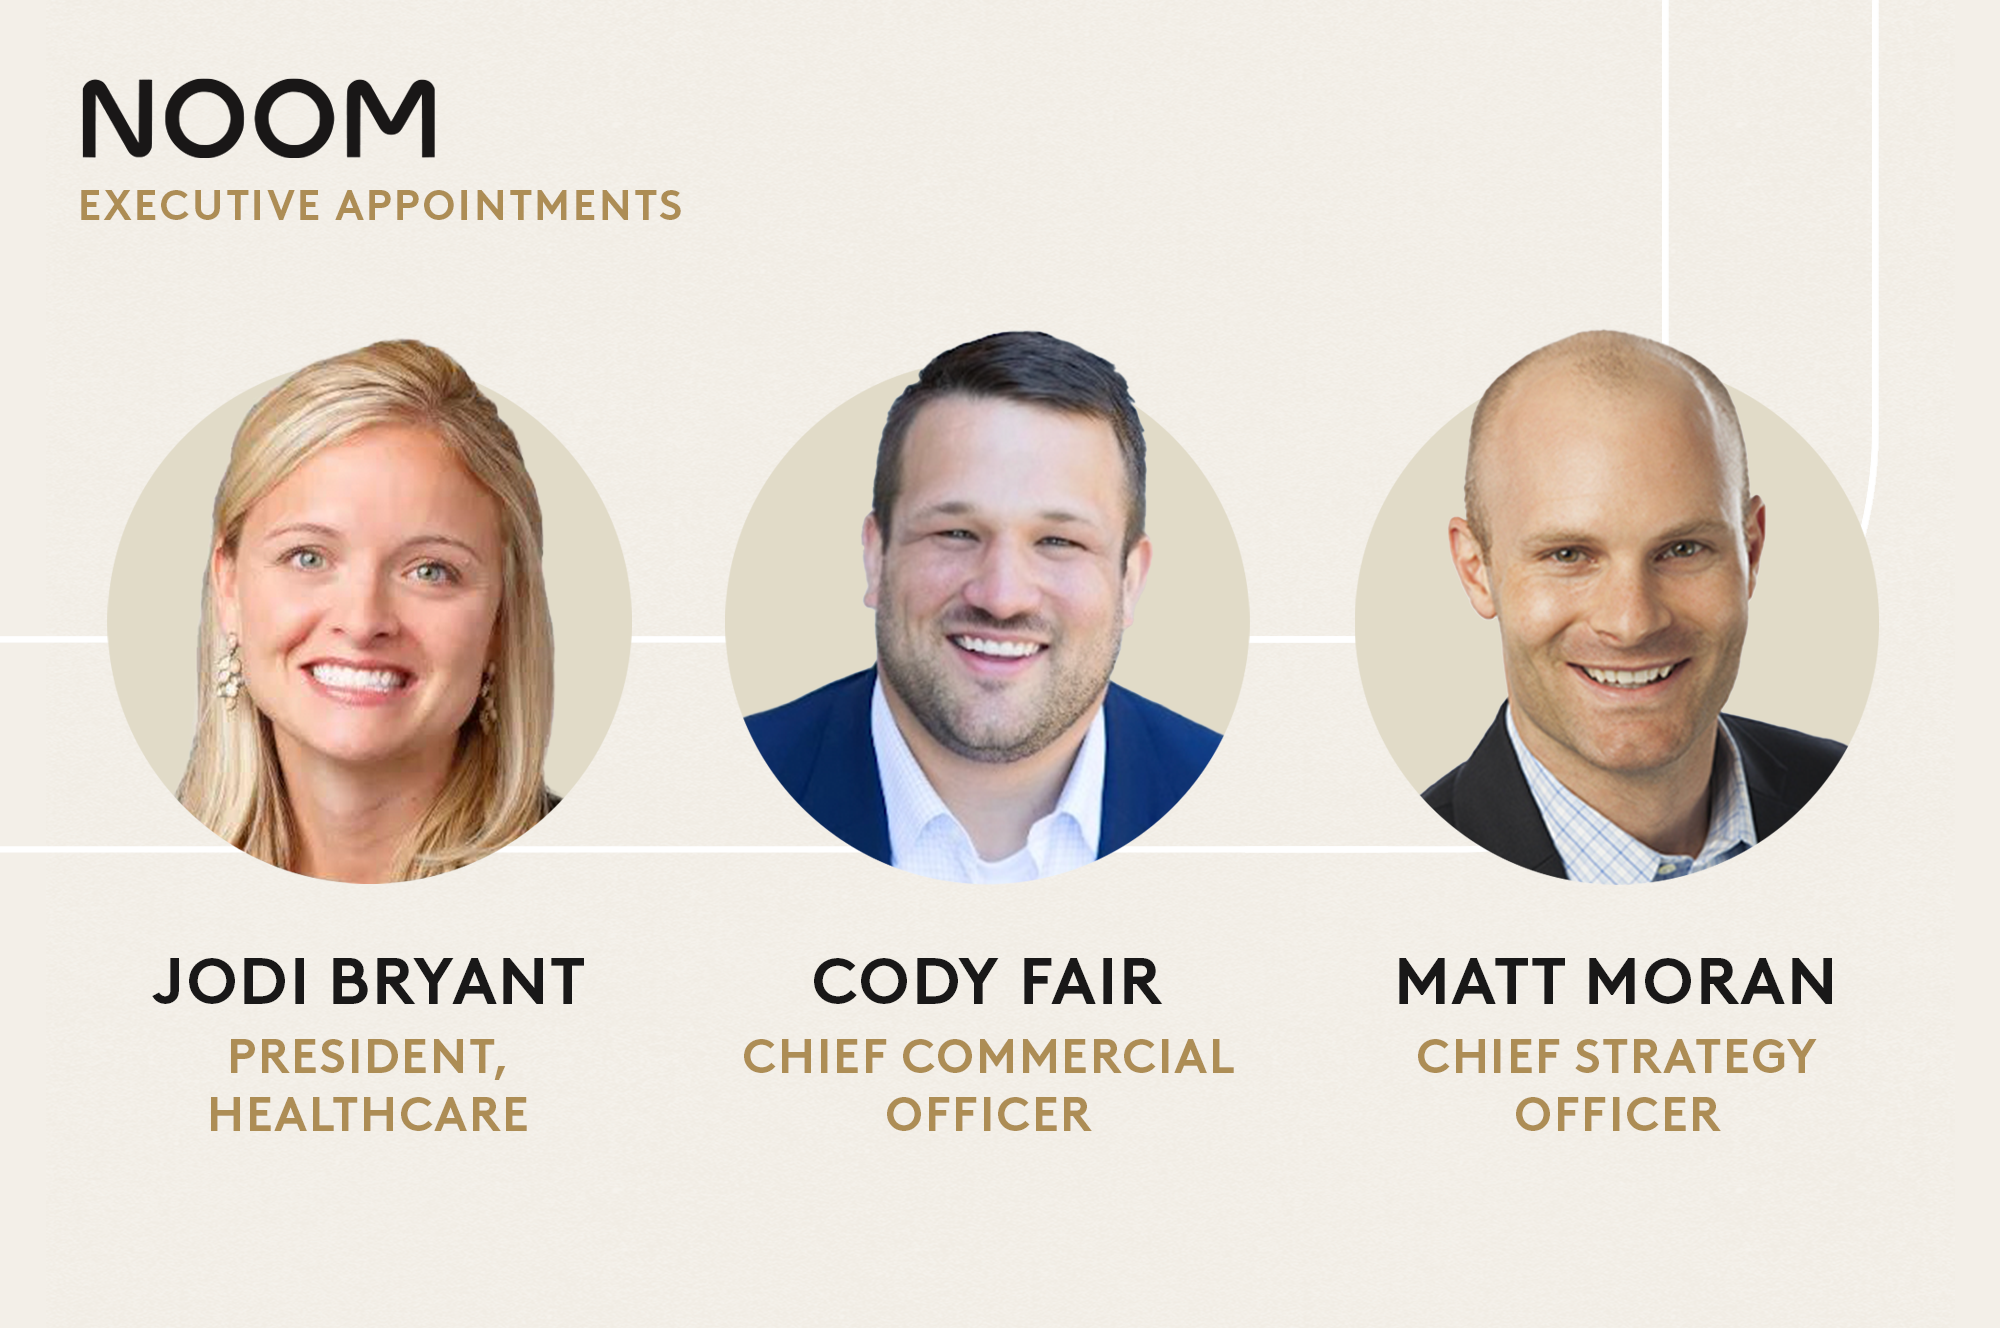 Jodi Bryant joins as President, Healthcare, Matt Moran as Chief Strategy Officer, and Cody Fair elevated to Chief Commercial Officer at Noom.